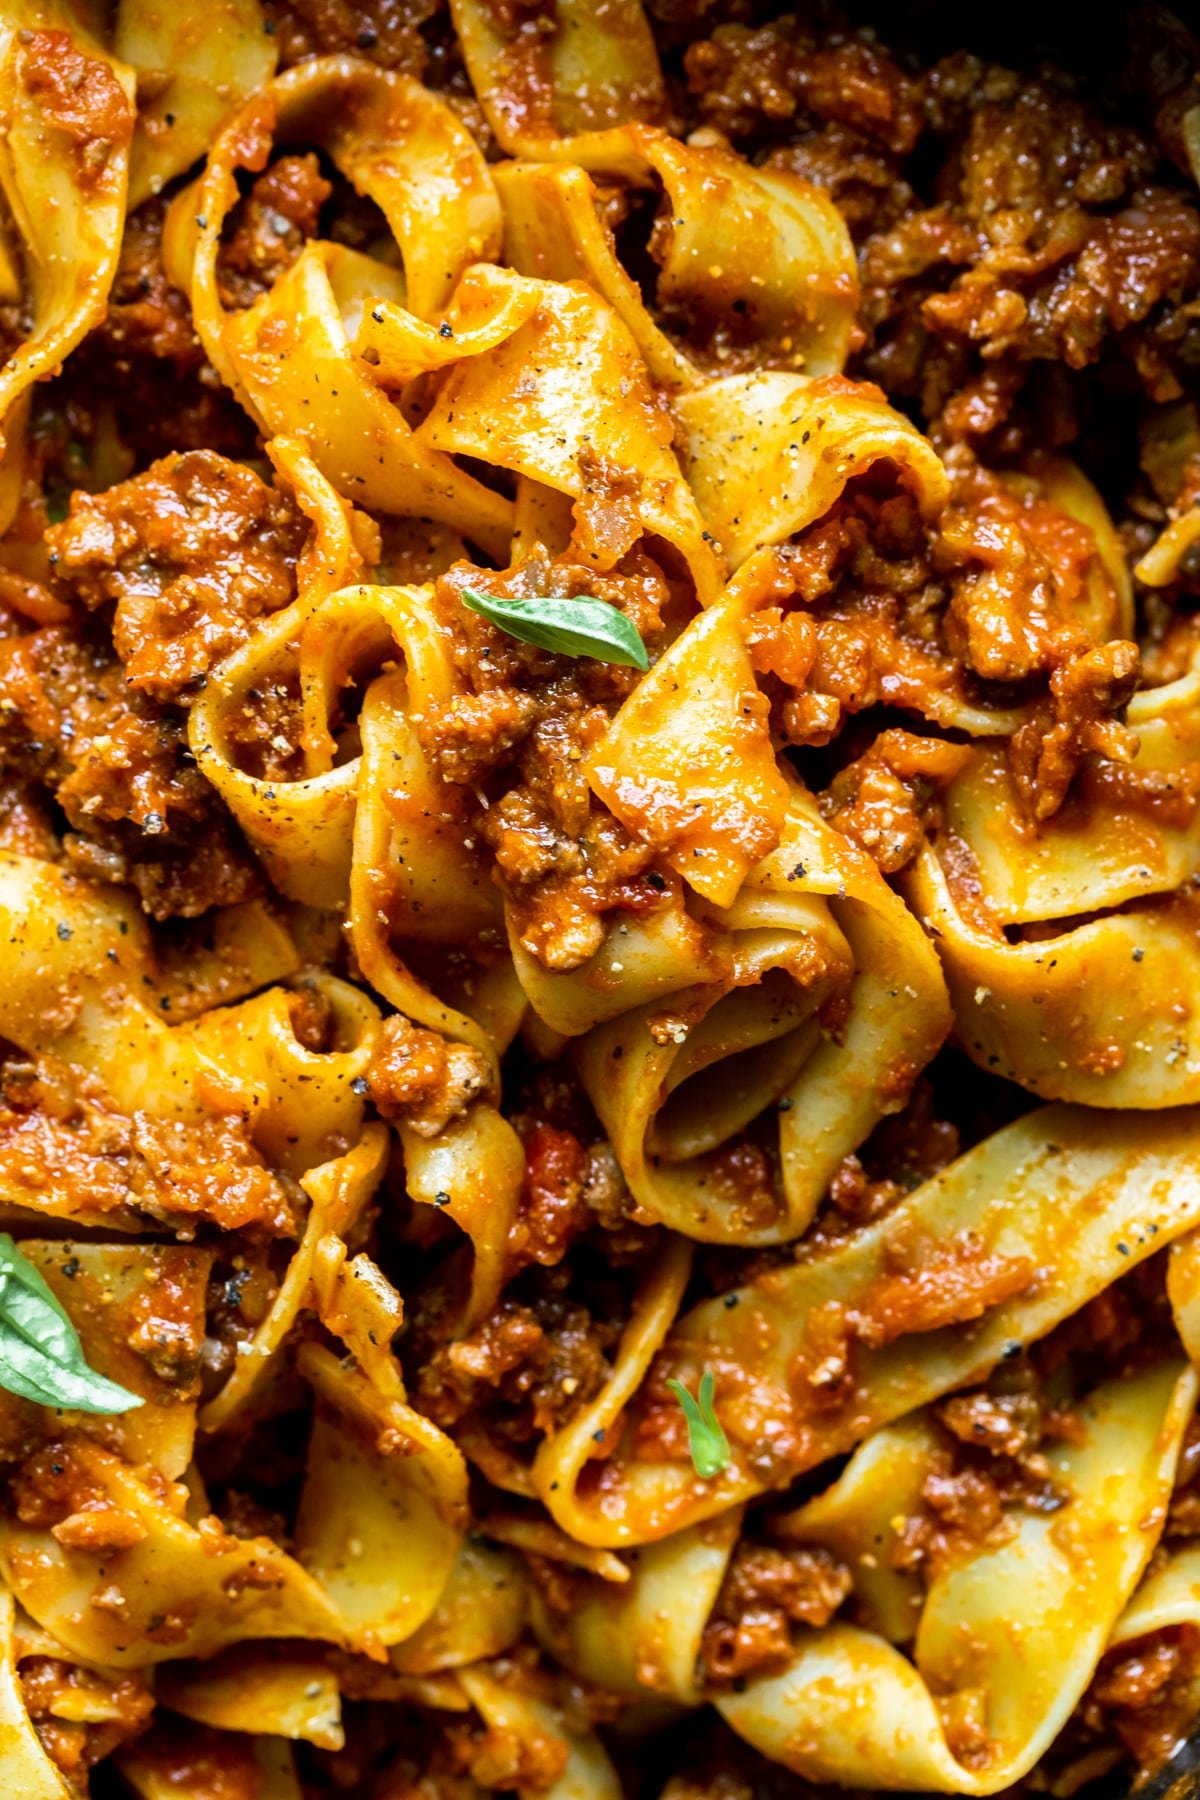 an up close image of bolognese sauce swirled in cooked pappardelle pasta noodles. 